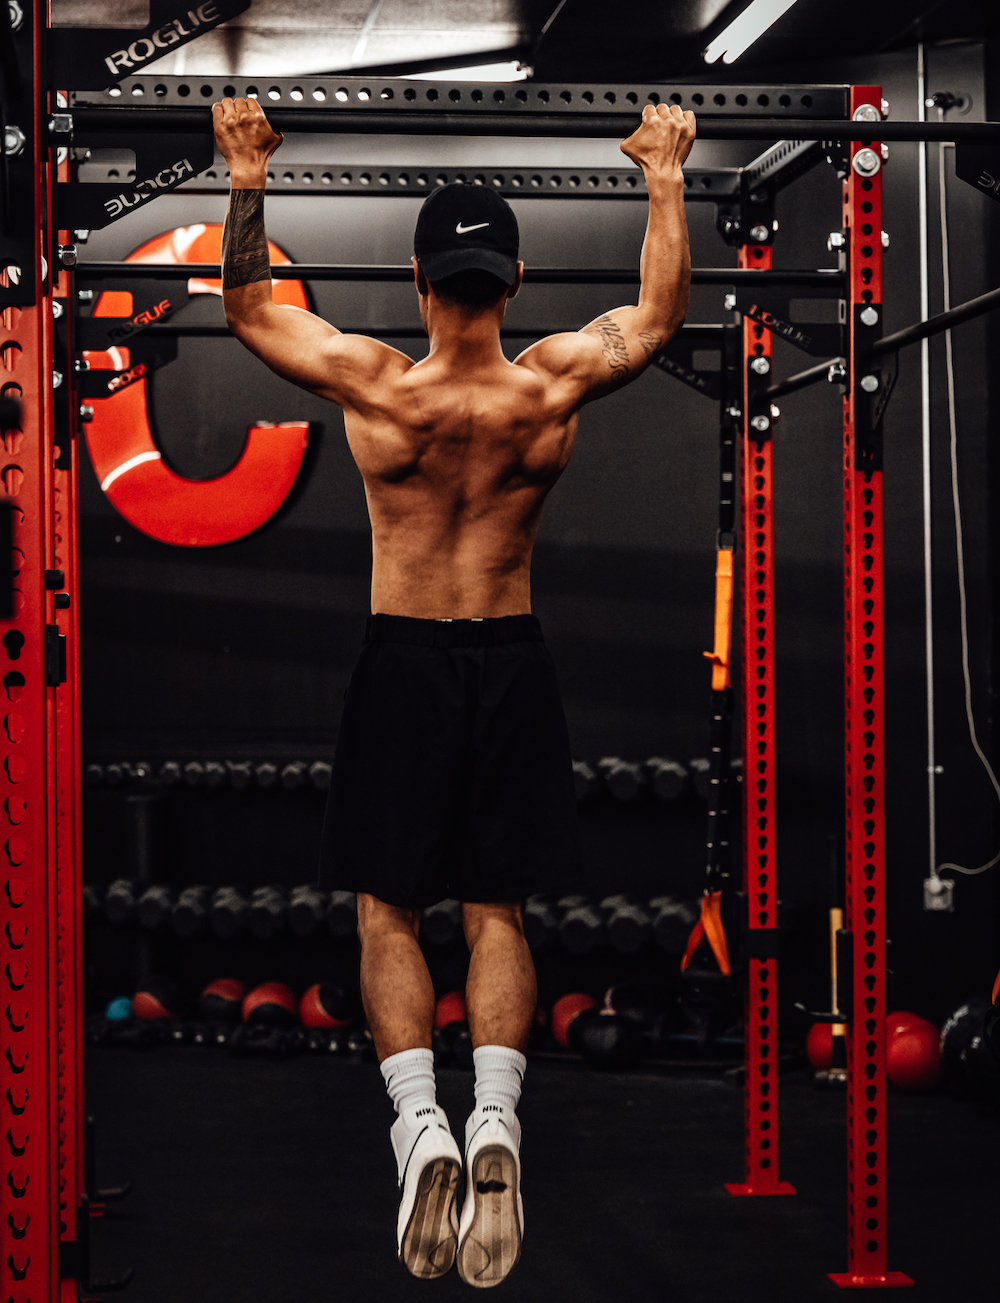 Rogue Individual Pullup System - Bodyweight Training - CrossFit